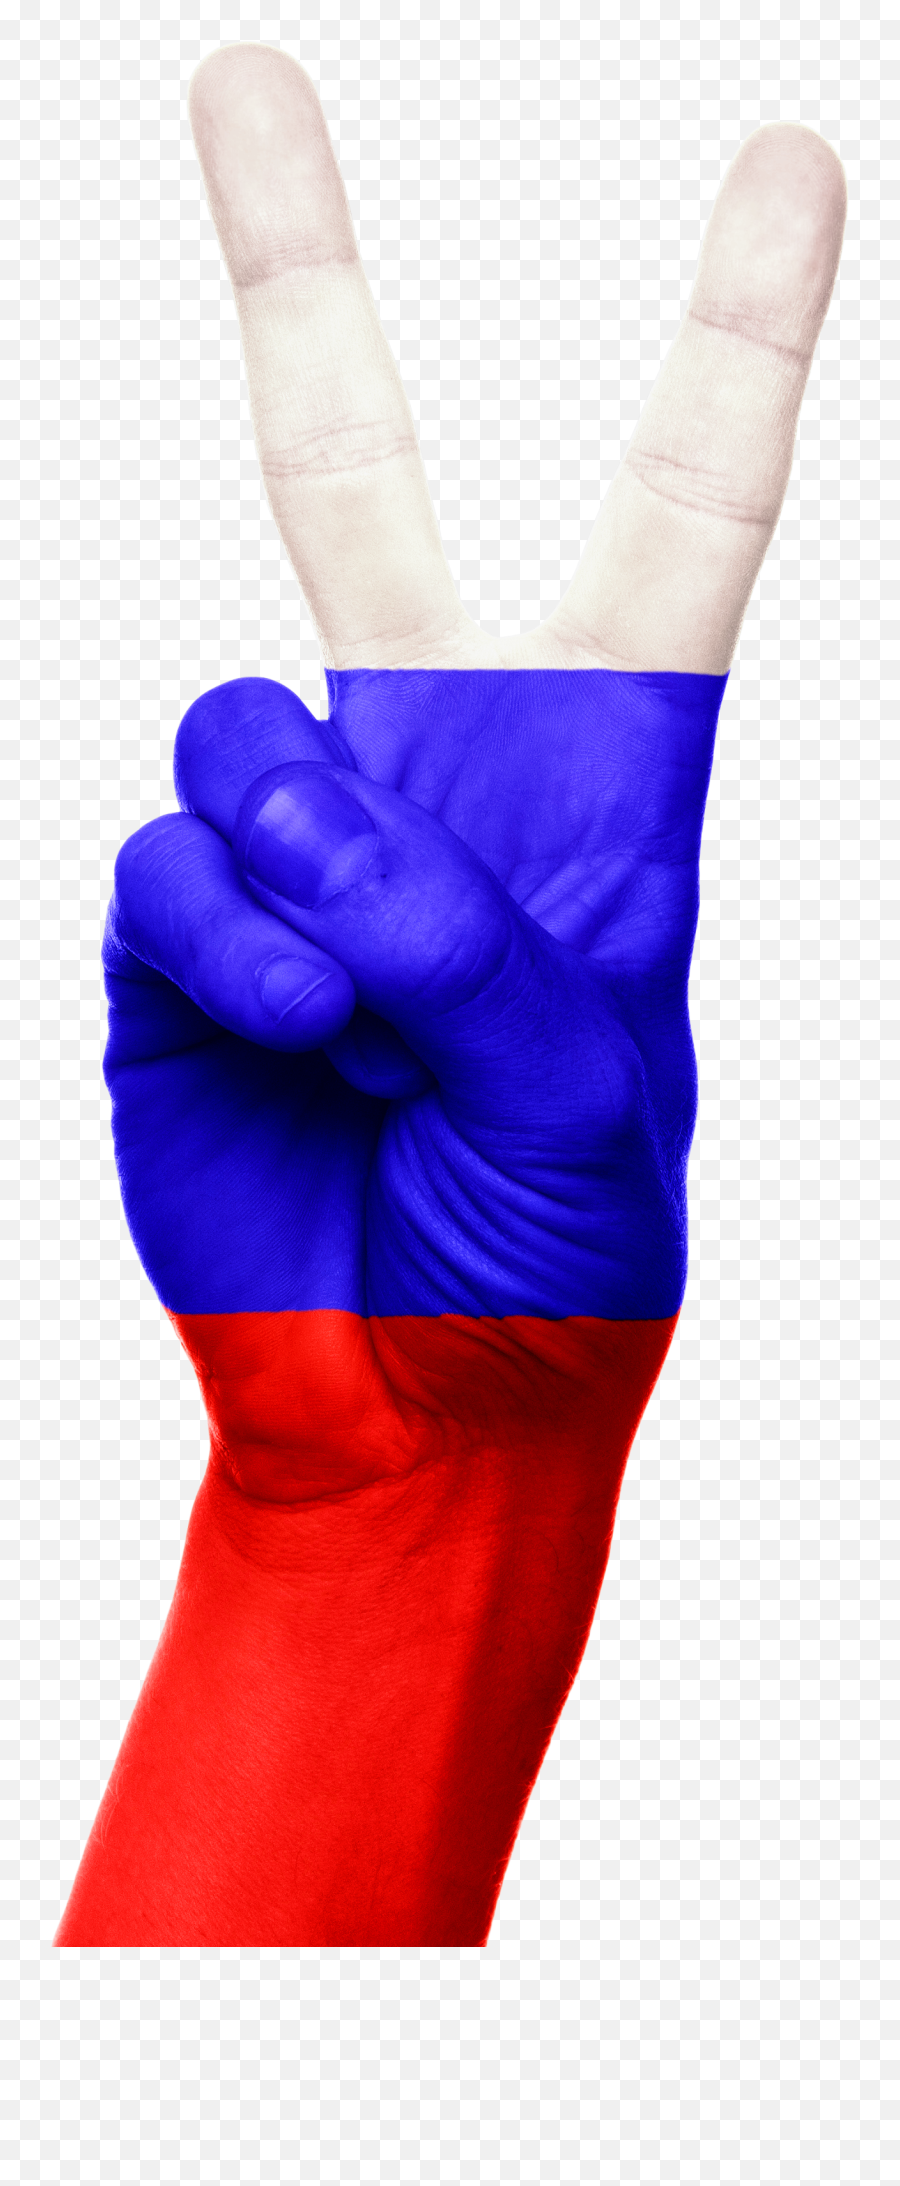 Snappygoatcom - Free Public Domain Images Snappygoatcom Russian All Hand Png,Russia Flag Png